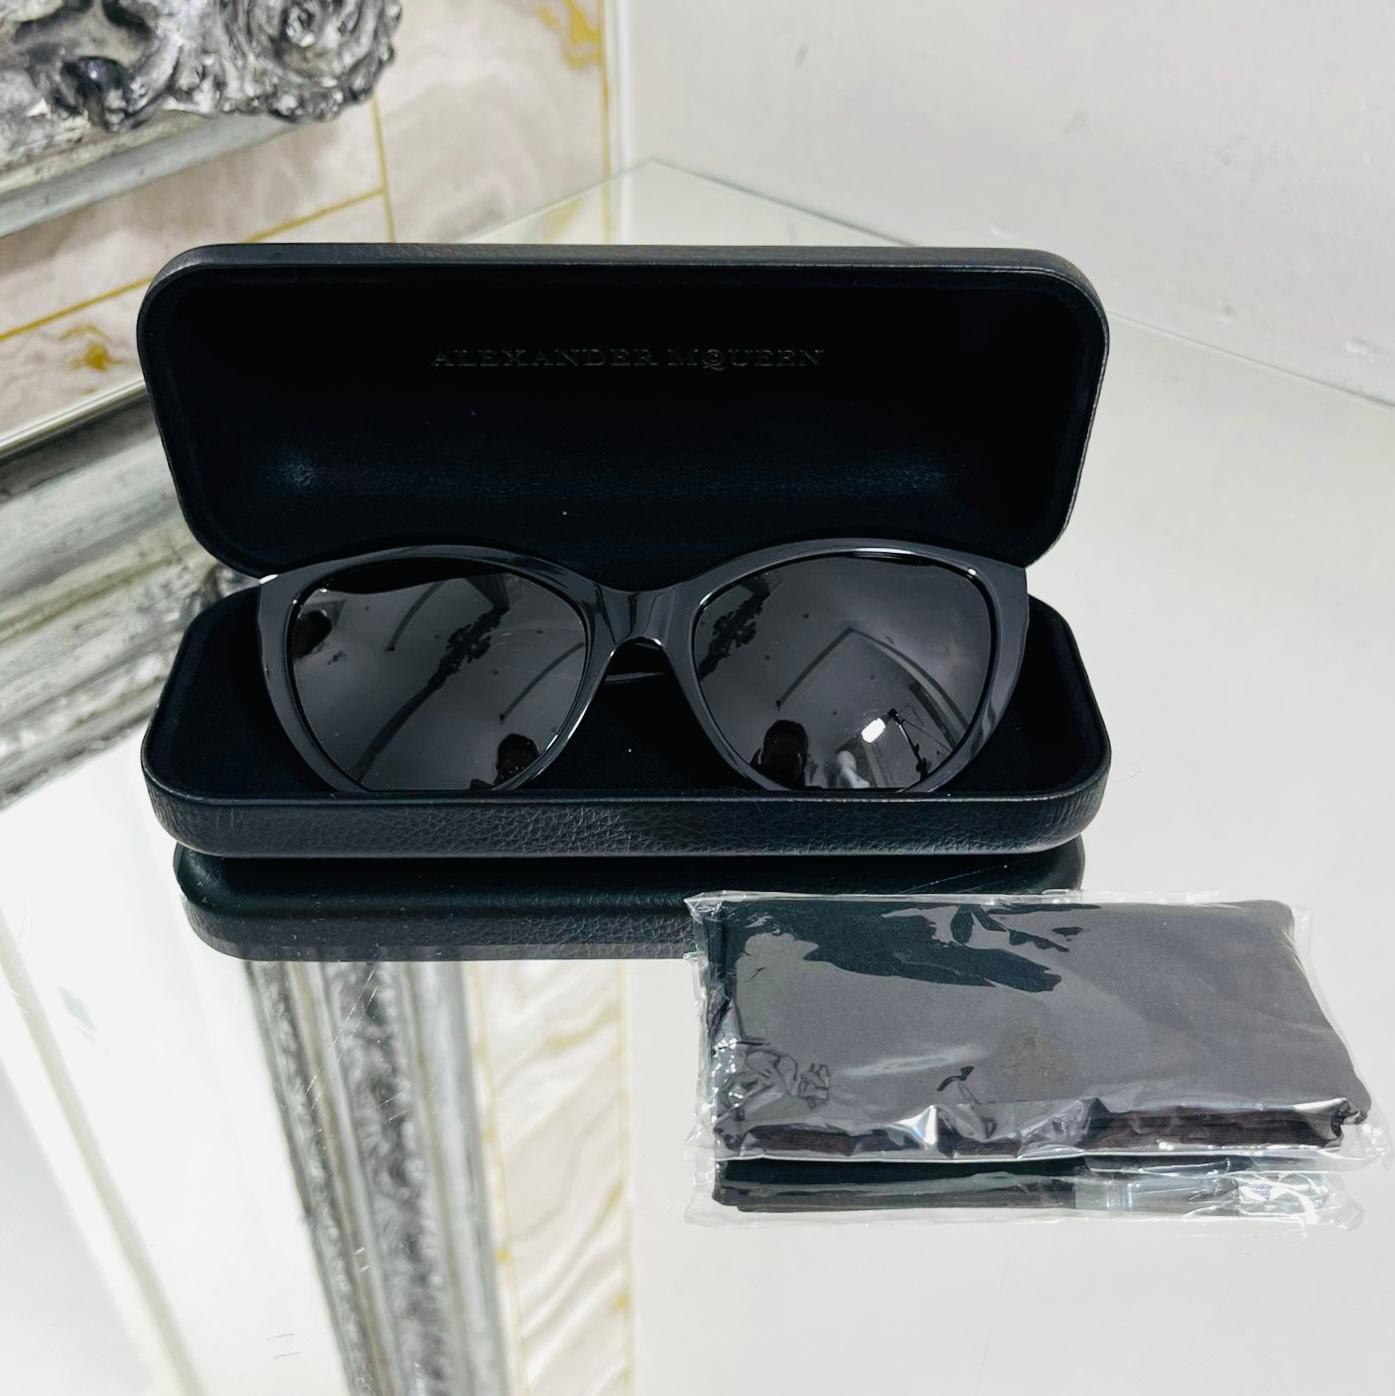 Alexander McQueen Cat Eye Sunglasses

Black sunglasses designed with grey lenses, styled with wide, black arms having 'Alexander McQueen' logo engraved.

Featuring 100% certified UV protective (UVA and UVB rays).

Size – One Size

Condition – Very